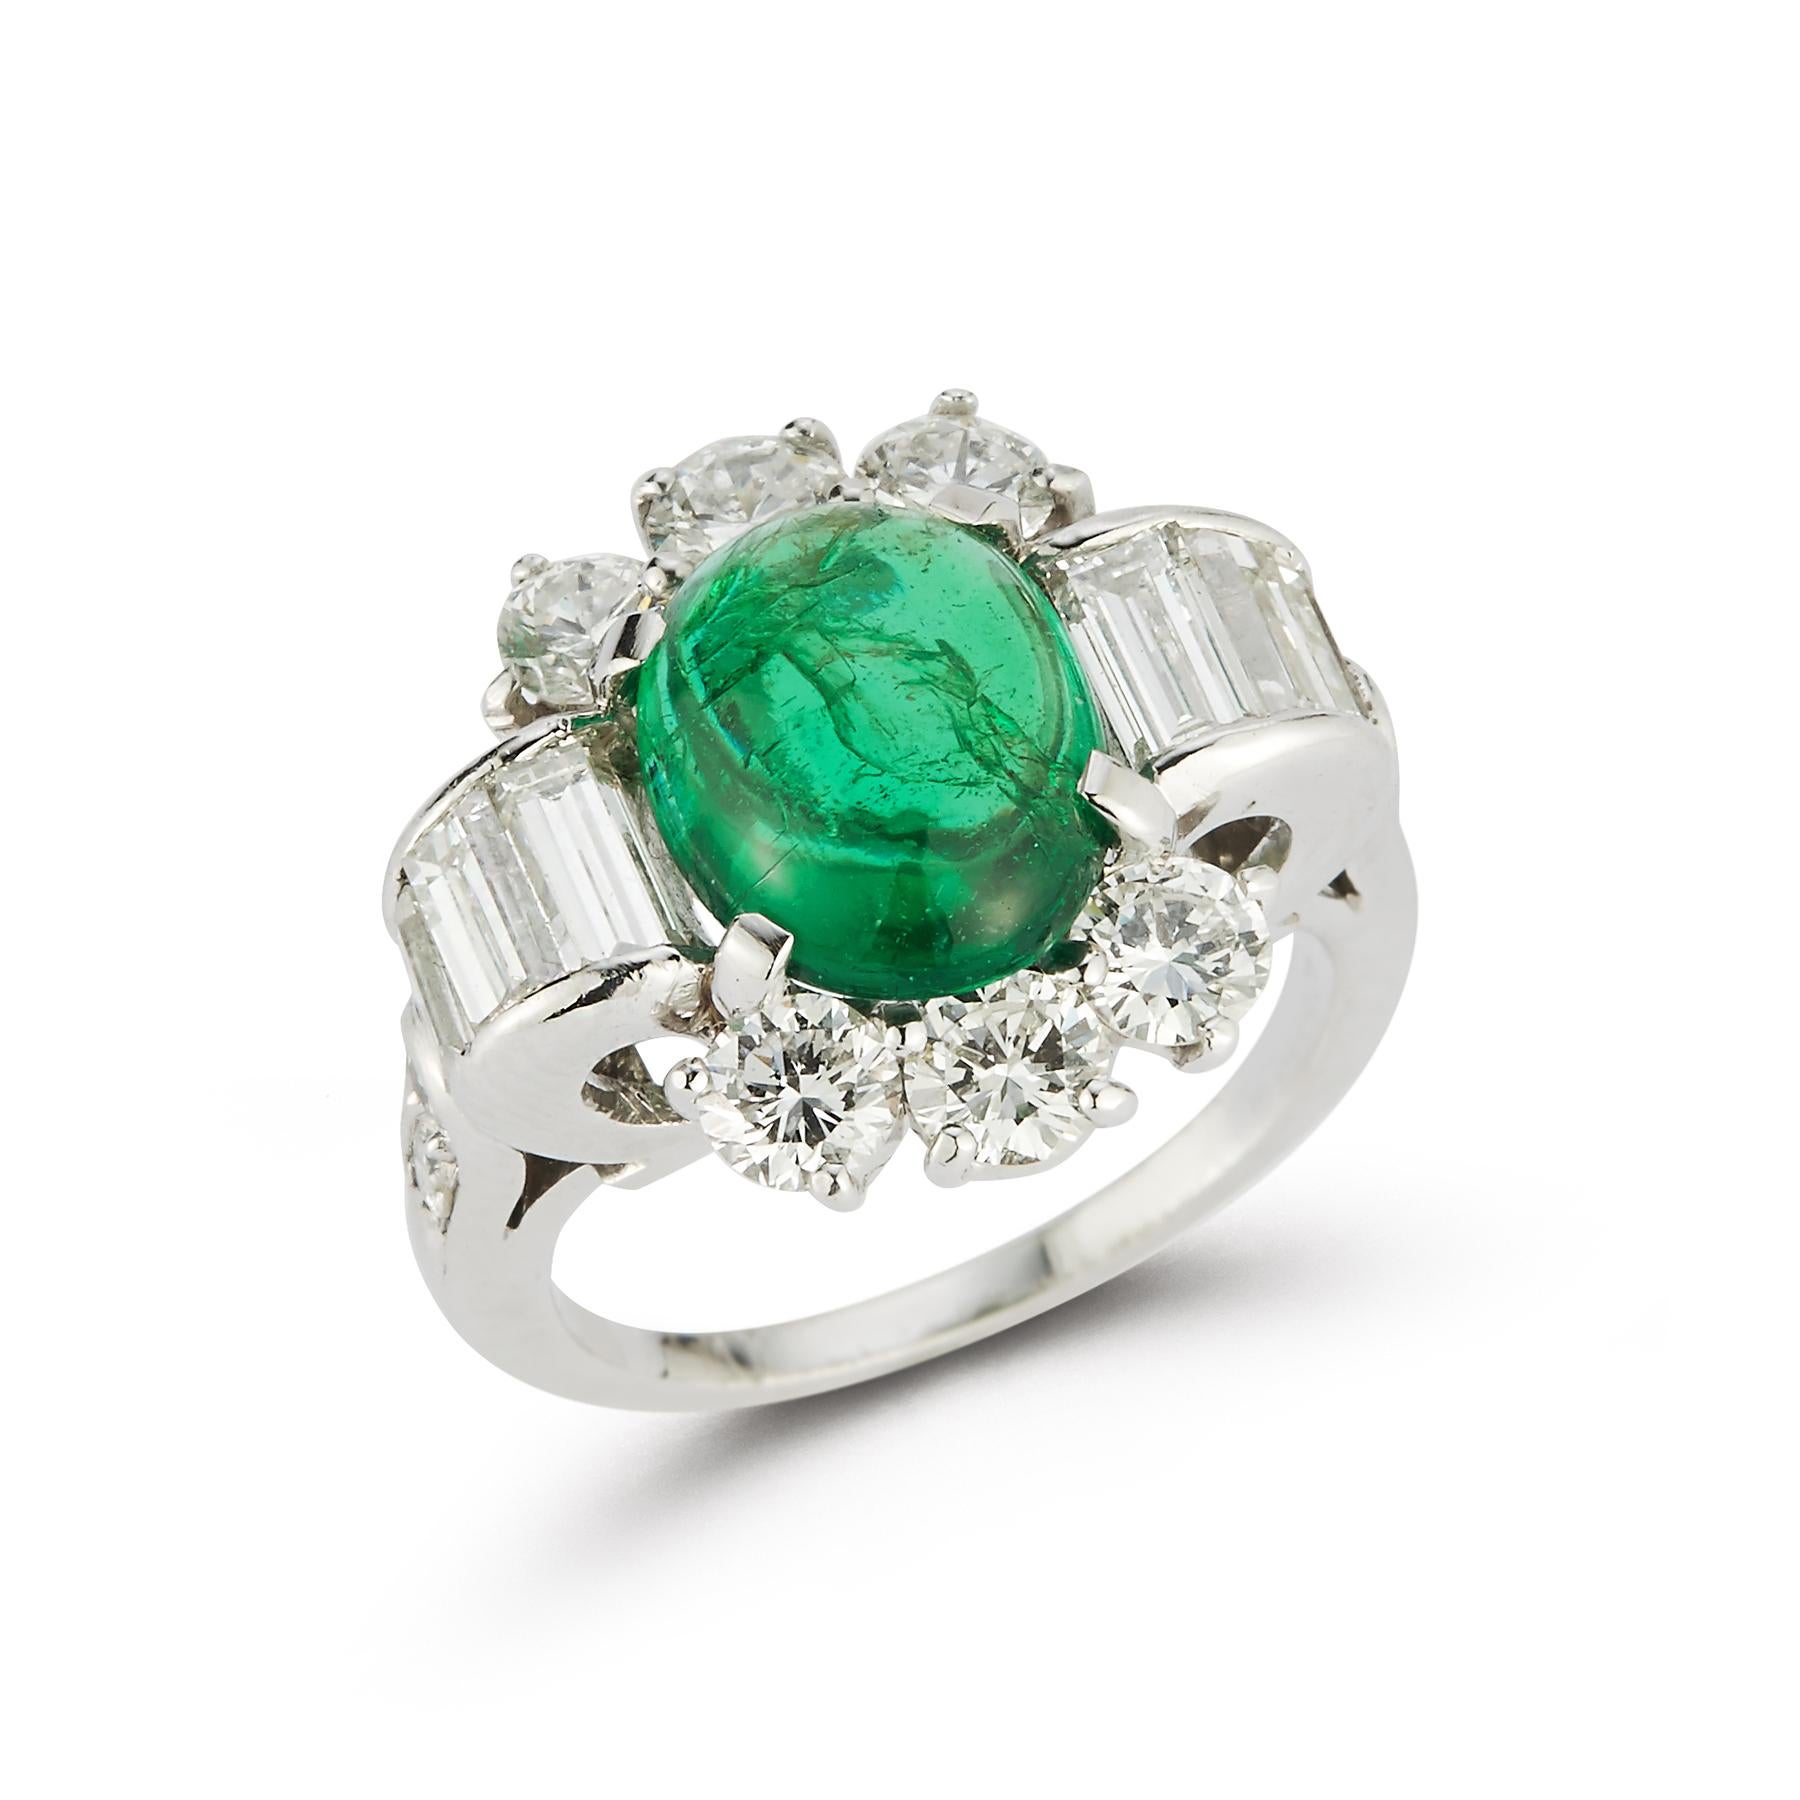 Art Deco Cabochon emerald & Diamond Ring 
Emerald Weight: approximately 2.70 cts
Round Cut Diamond Weight: .90 cts 
Baguette Cut Diamond Weight: .90 cts
Small Round cut Diamond Weight: .12 cts 
Ring size: 3.75
Resizable free of charge
Gold Type: